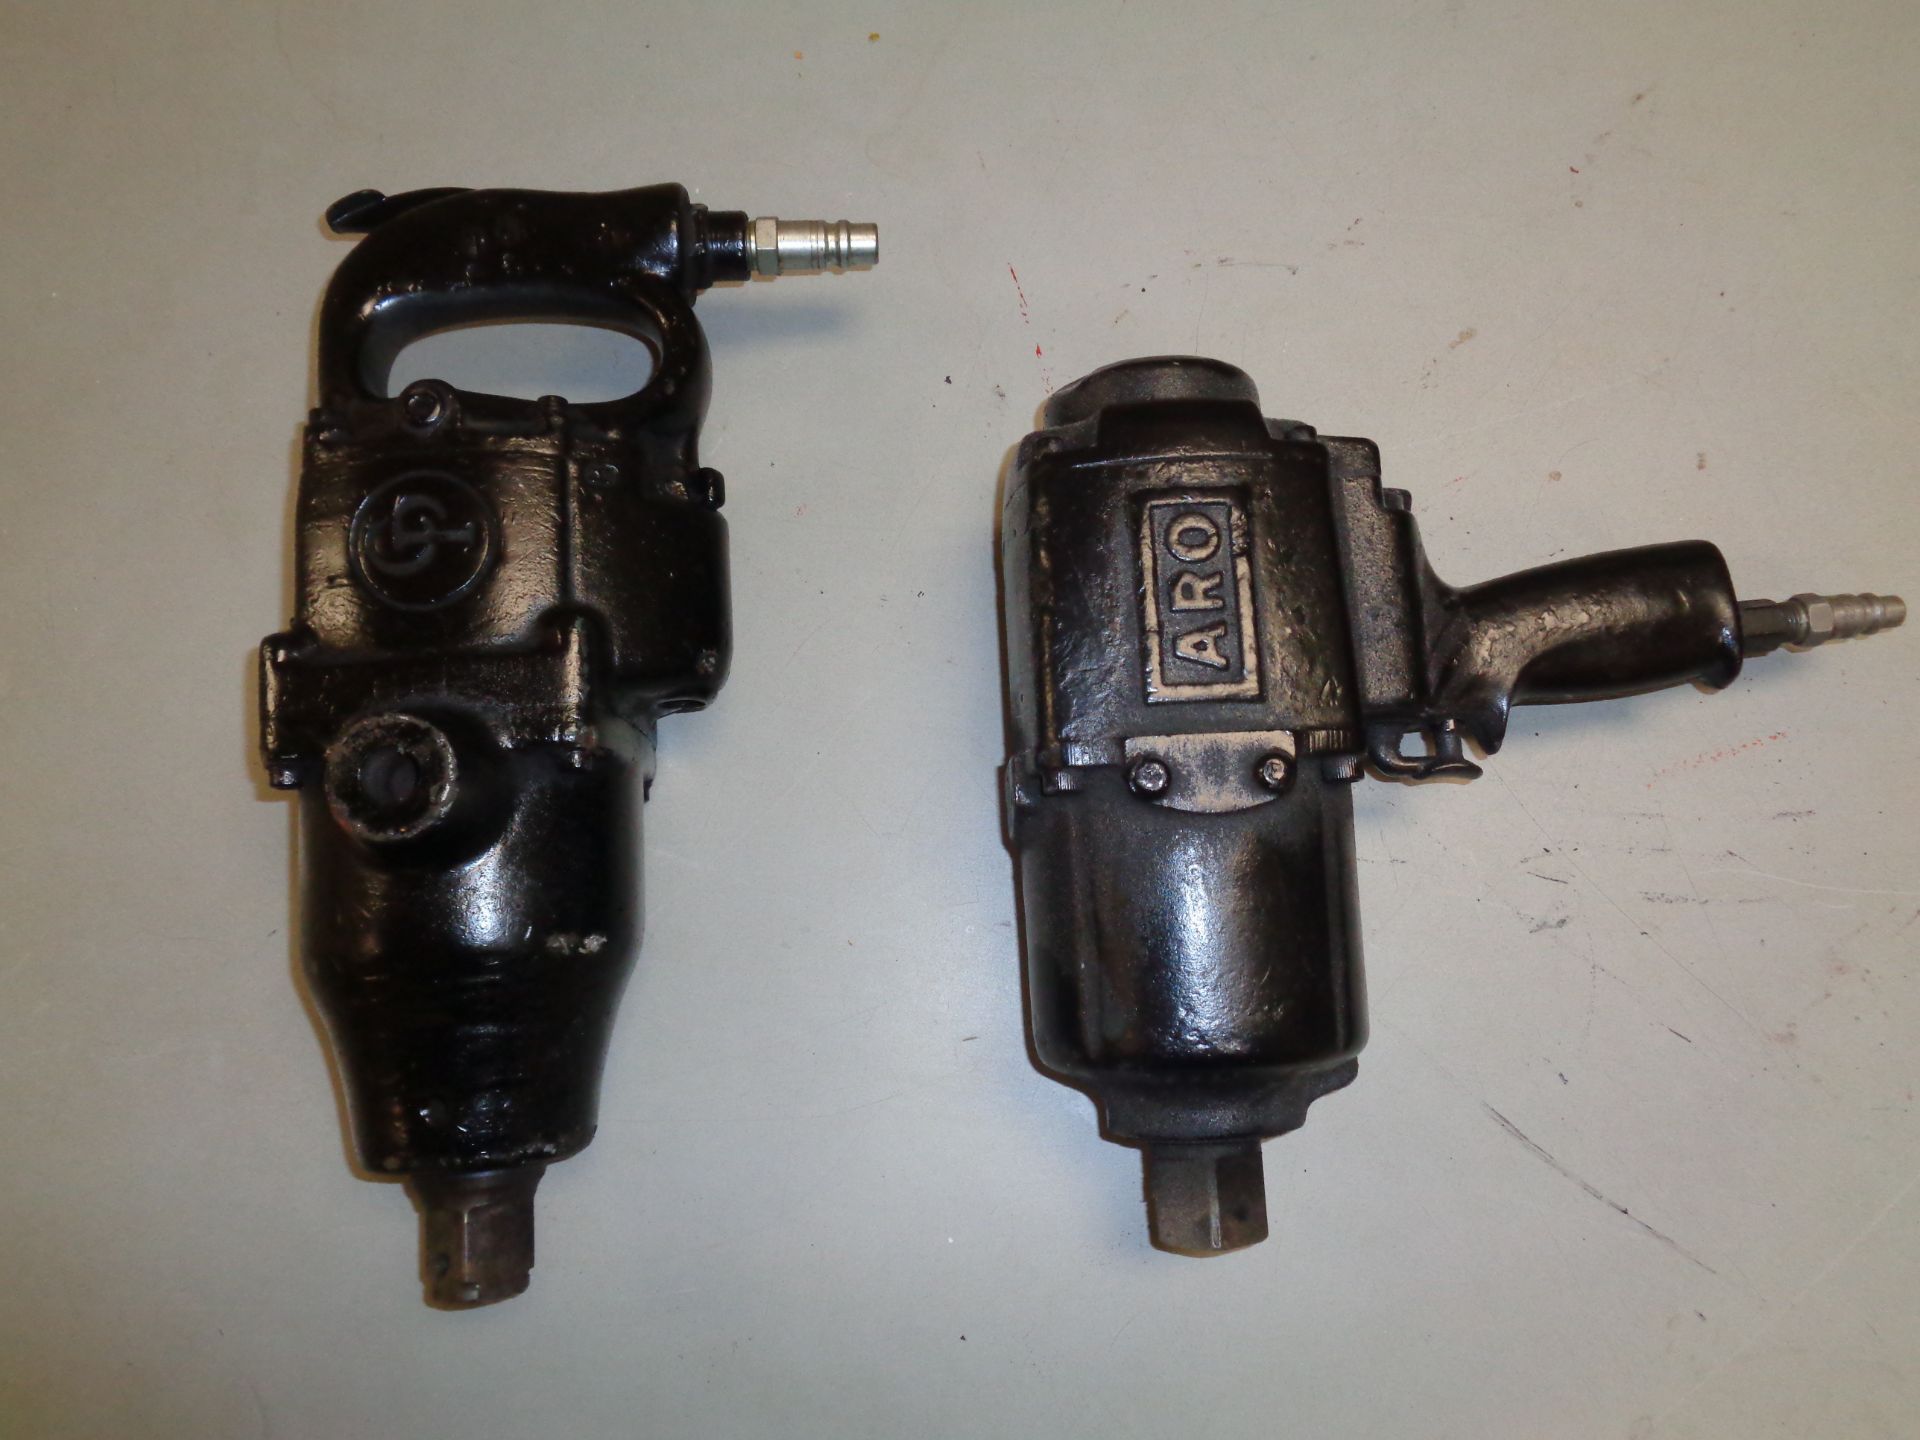 Lot of 2 3/4in Drive Impact Guns - Image 4 of 5